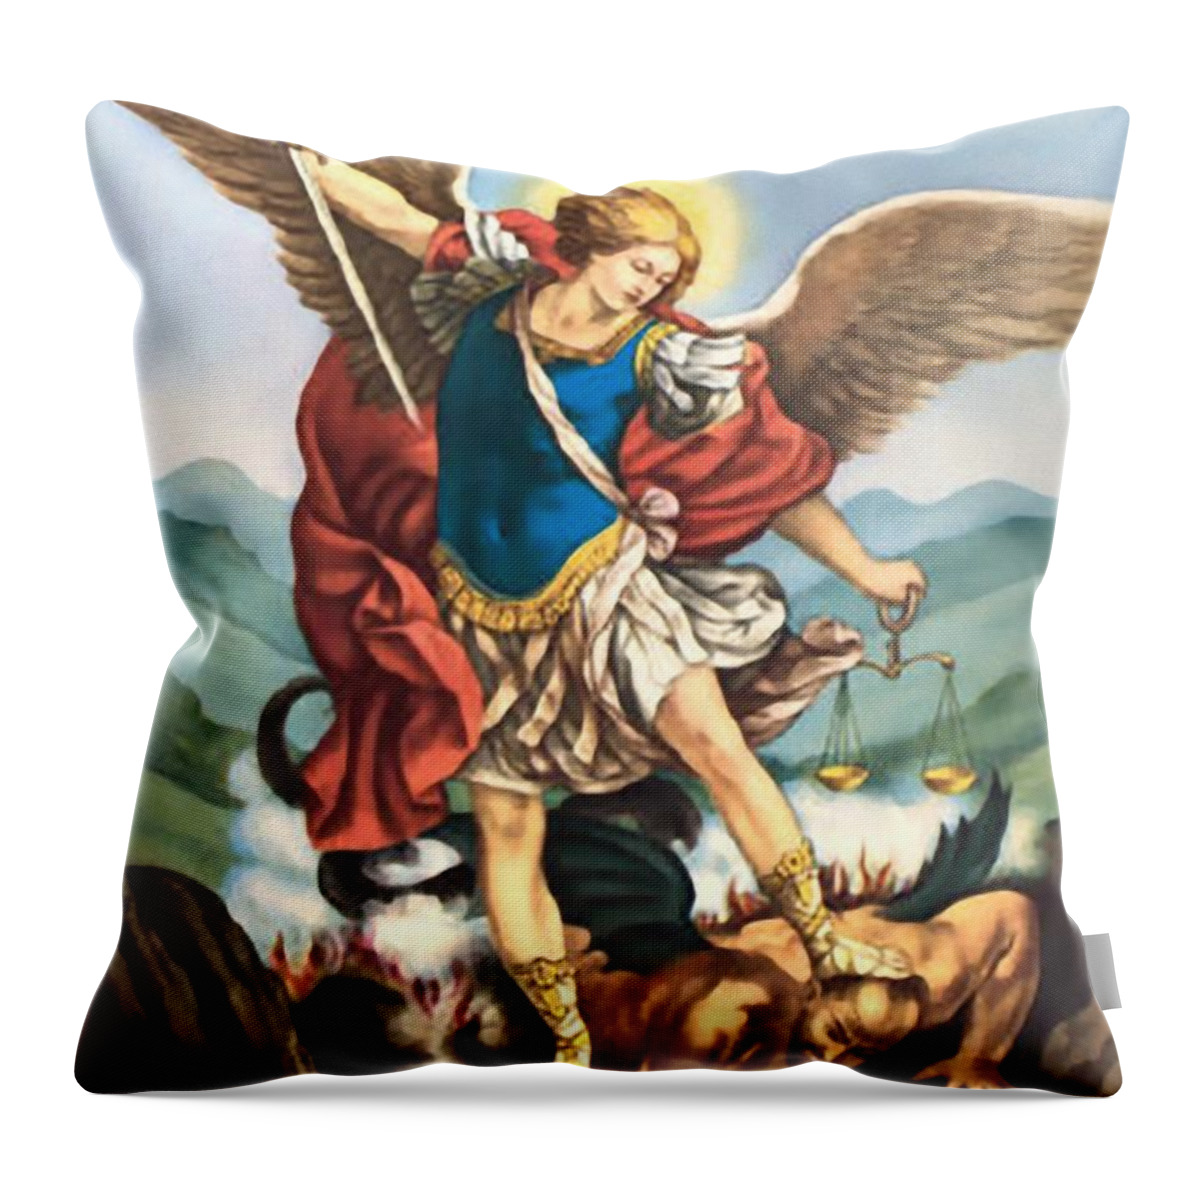 San Throw Pillow featuring the painting Michele by Matteo TOTARO